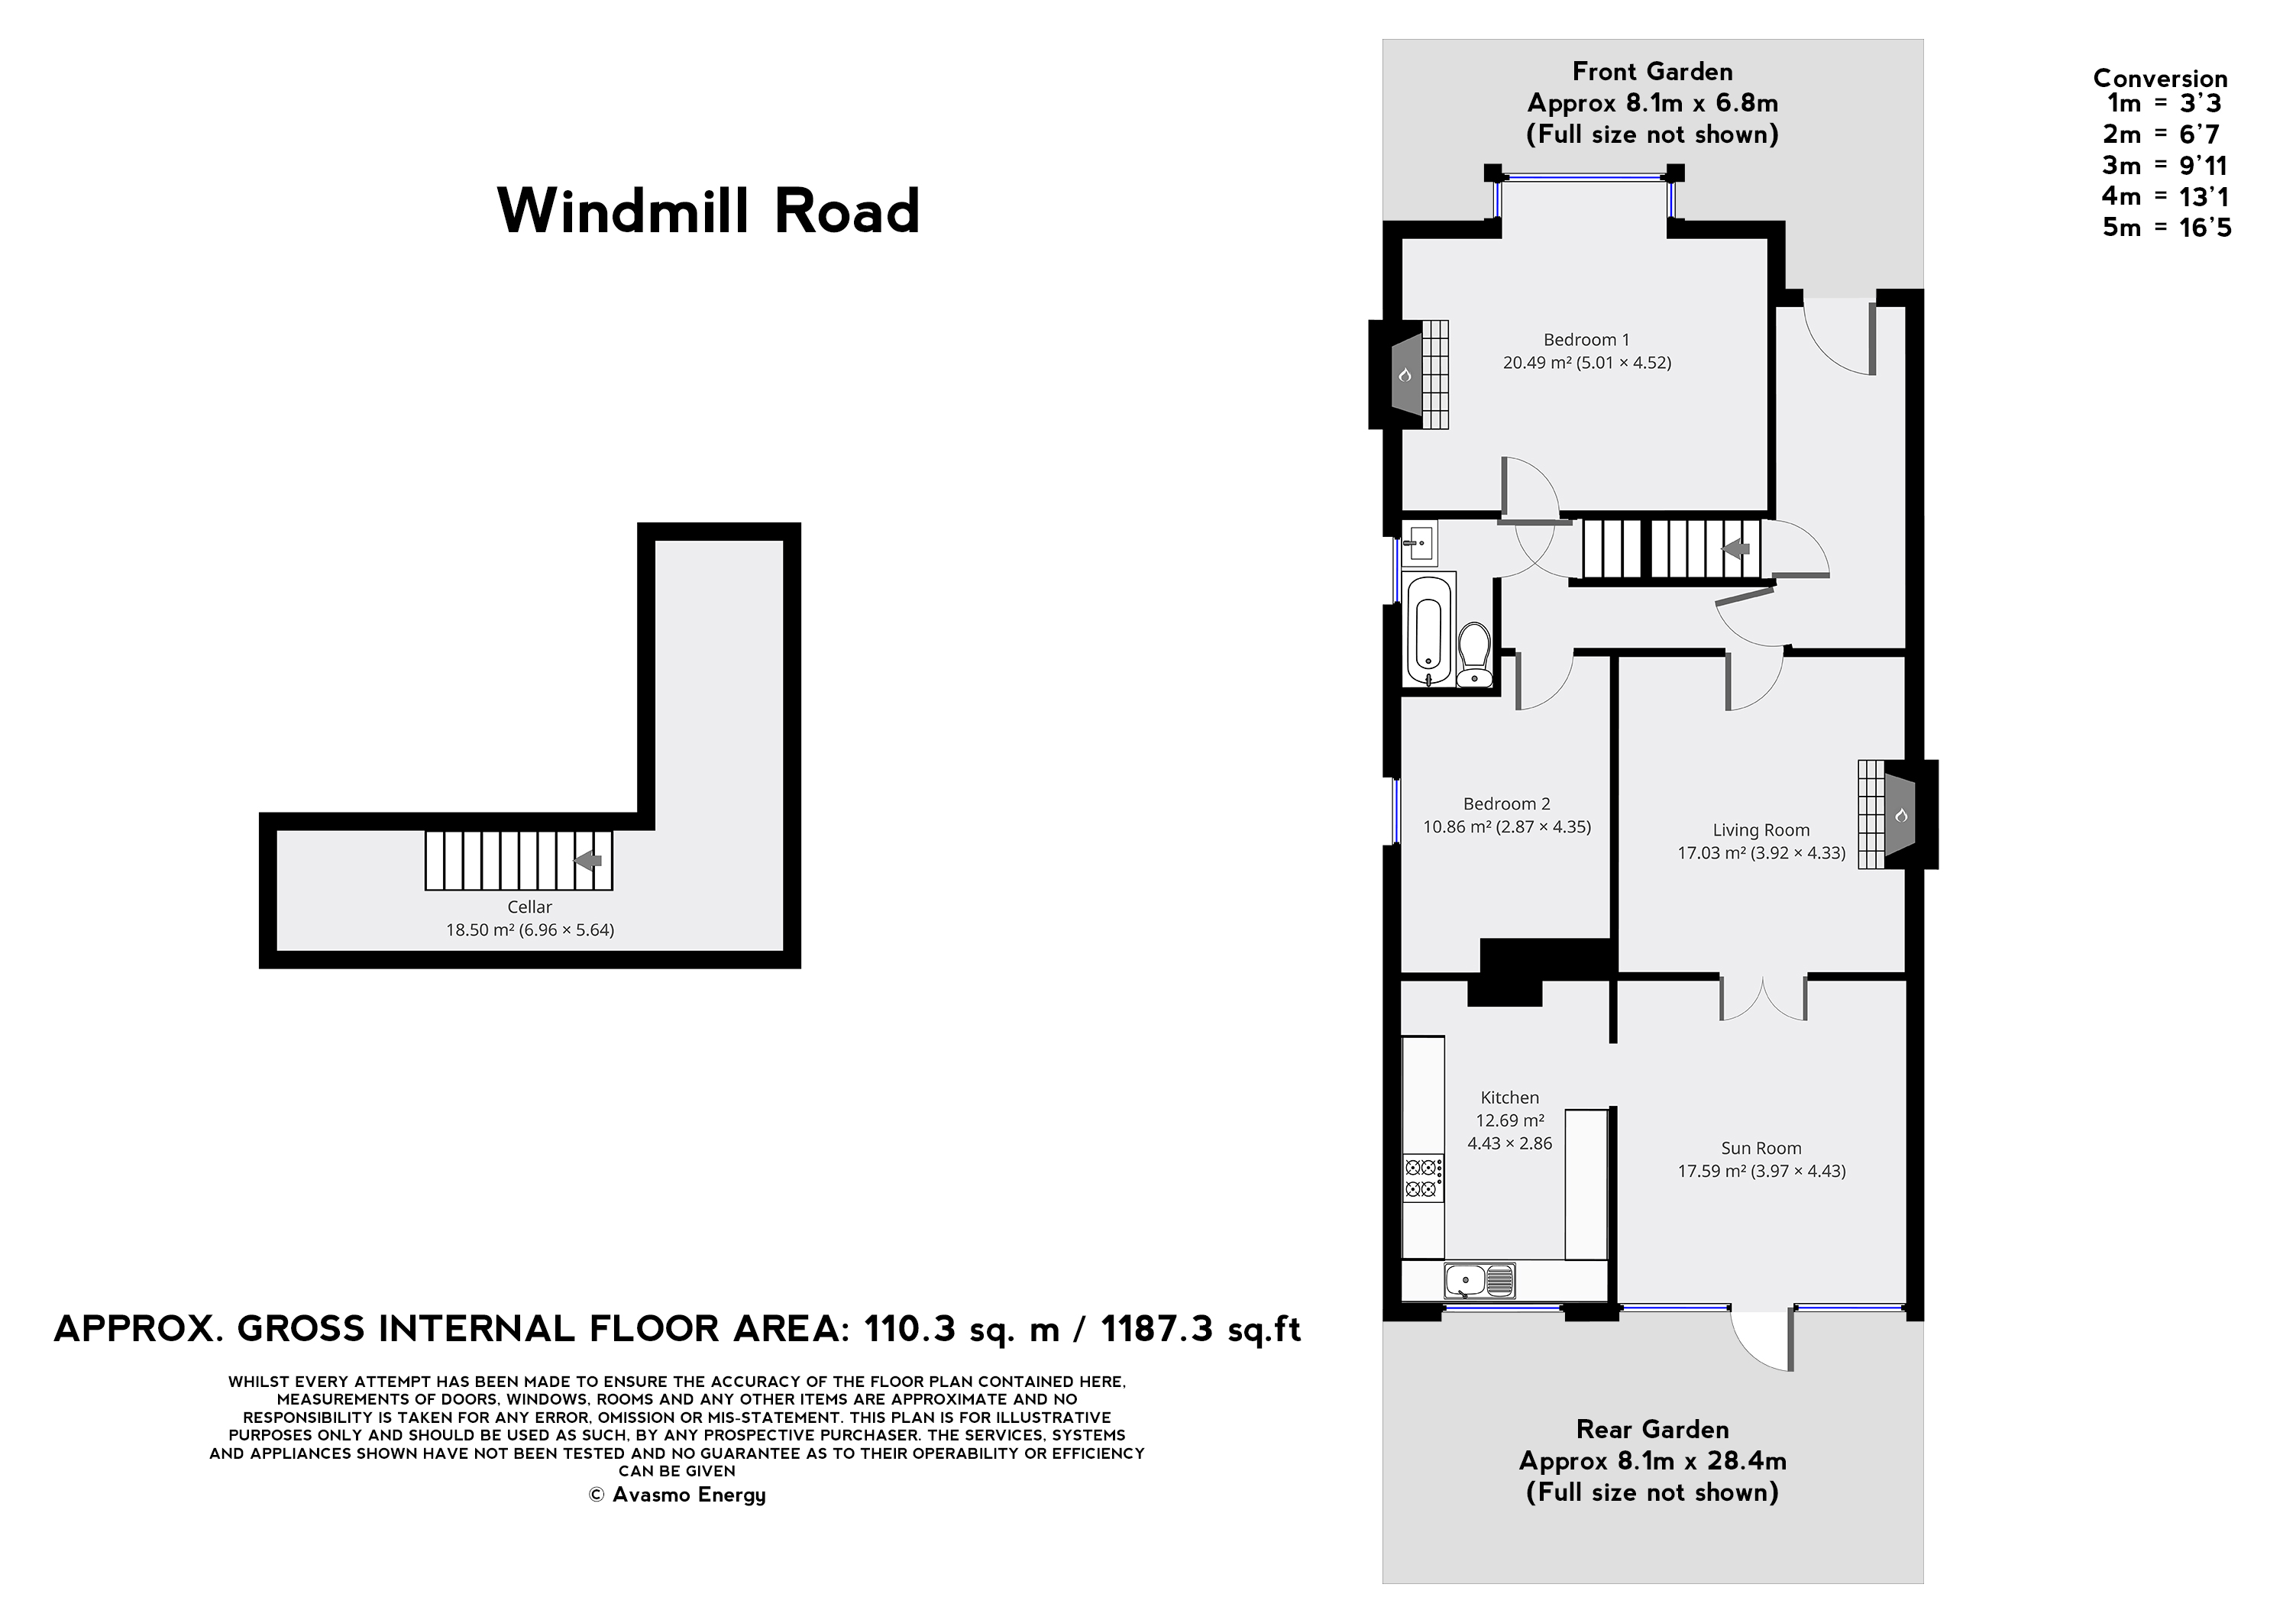 4 Bedrooms Semi-detached house for sale in Windmill Road, Brentford TW8